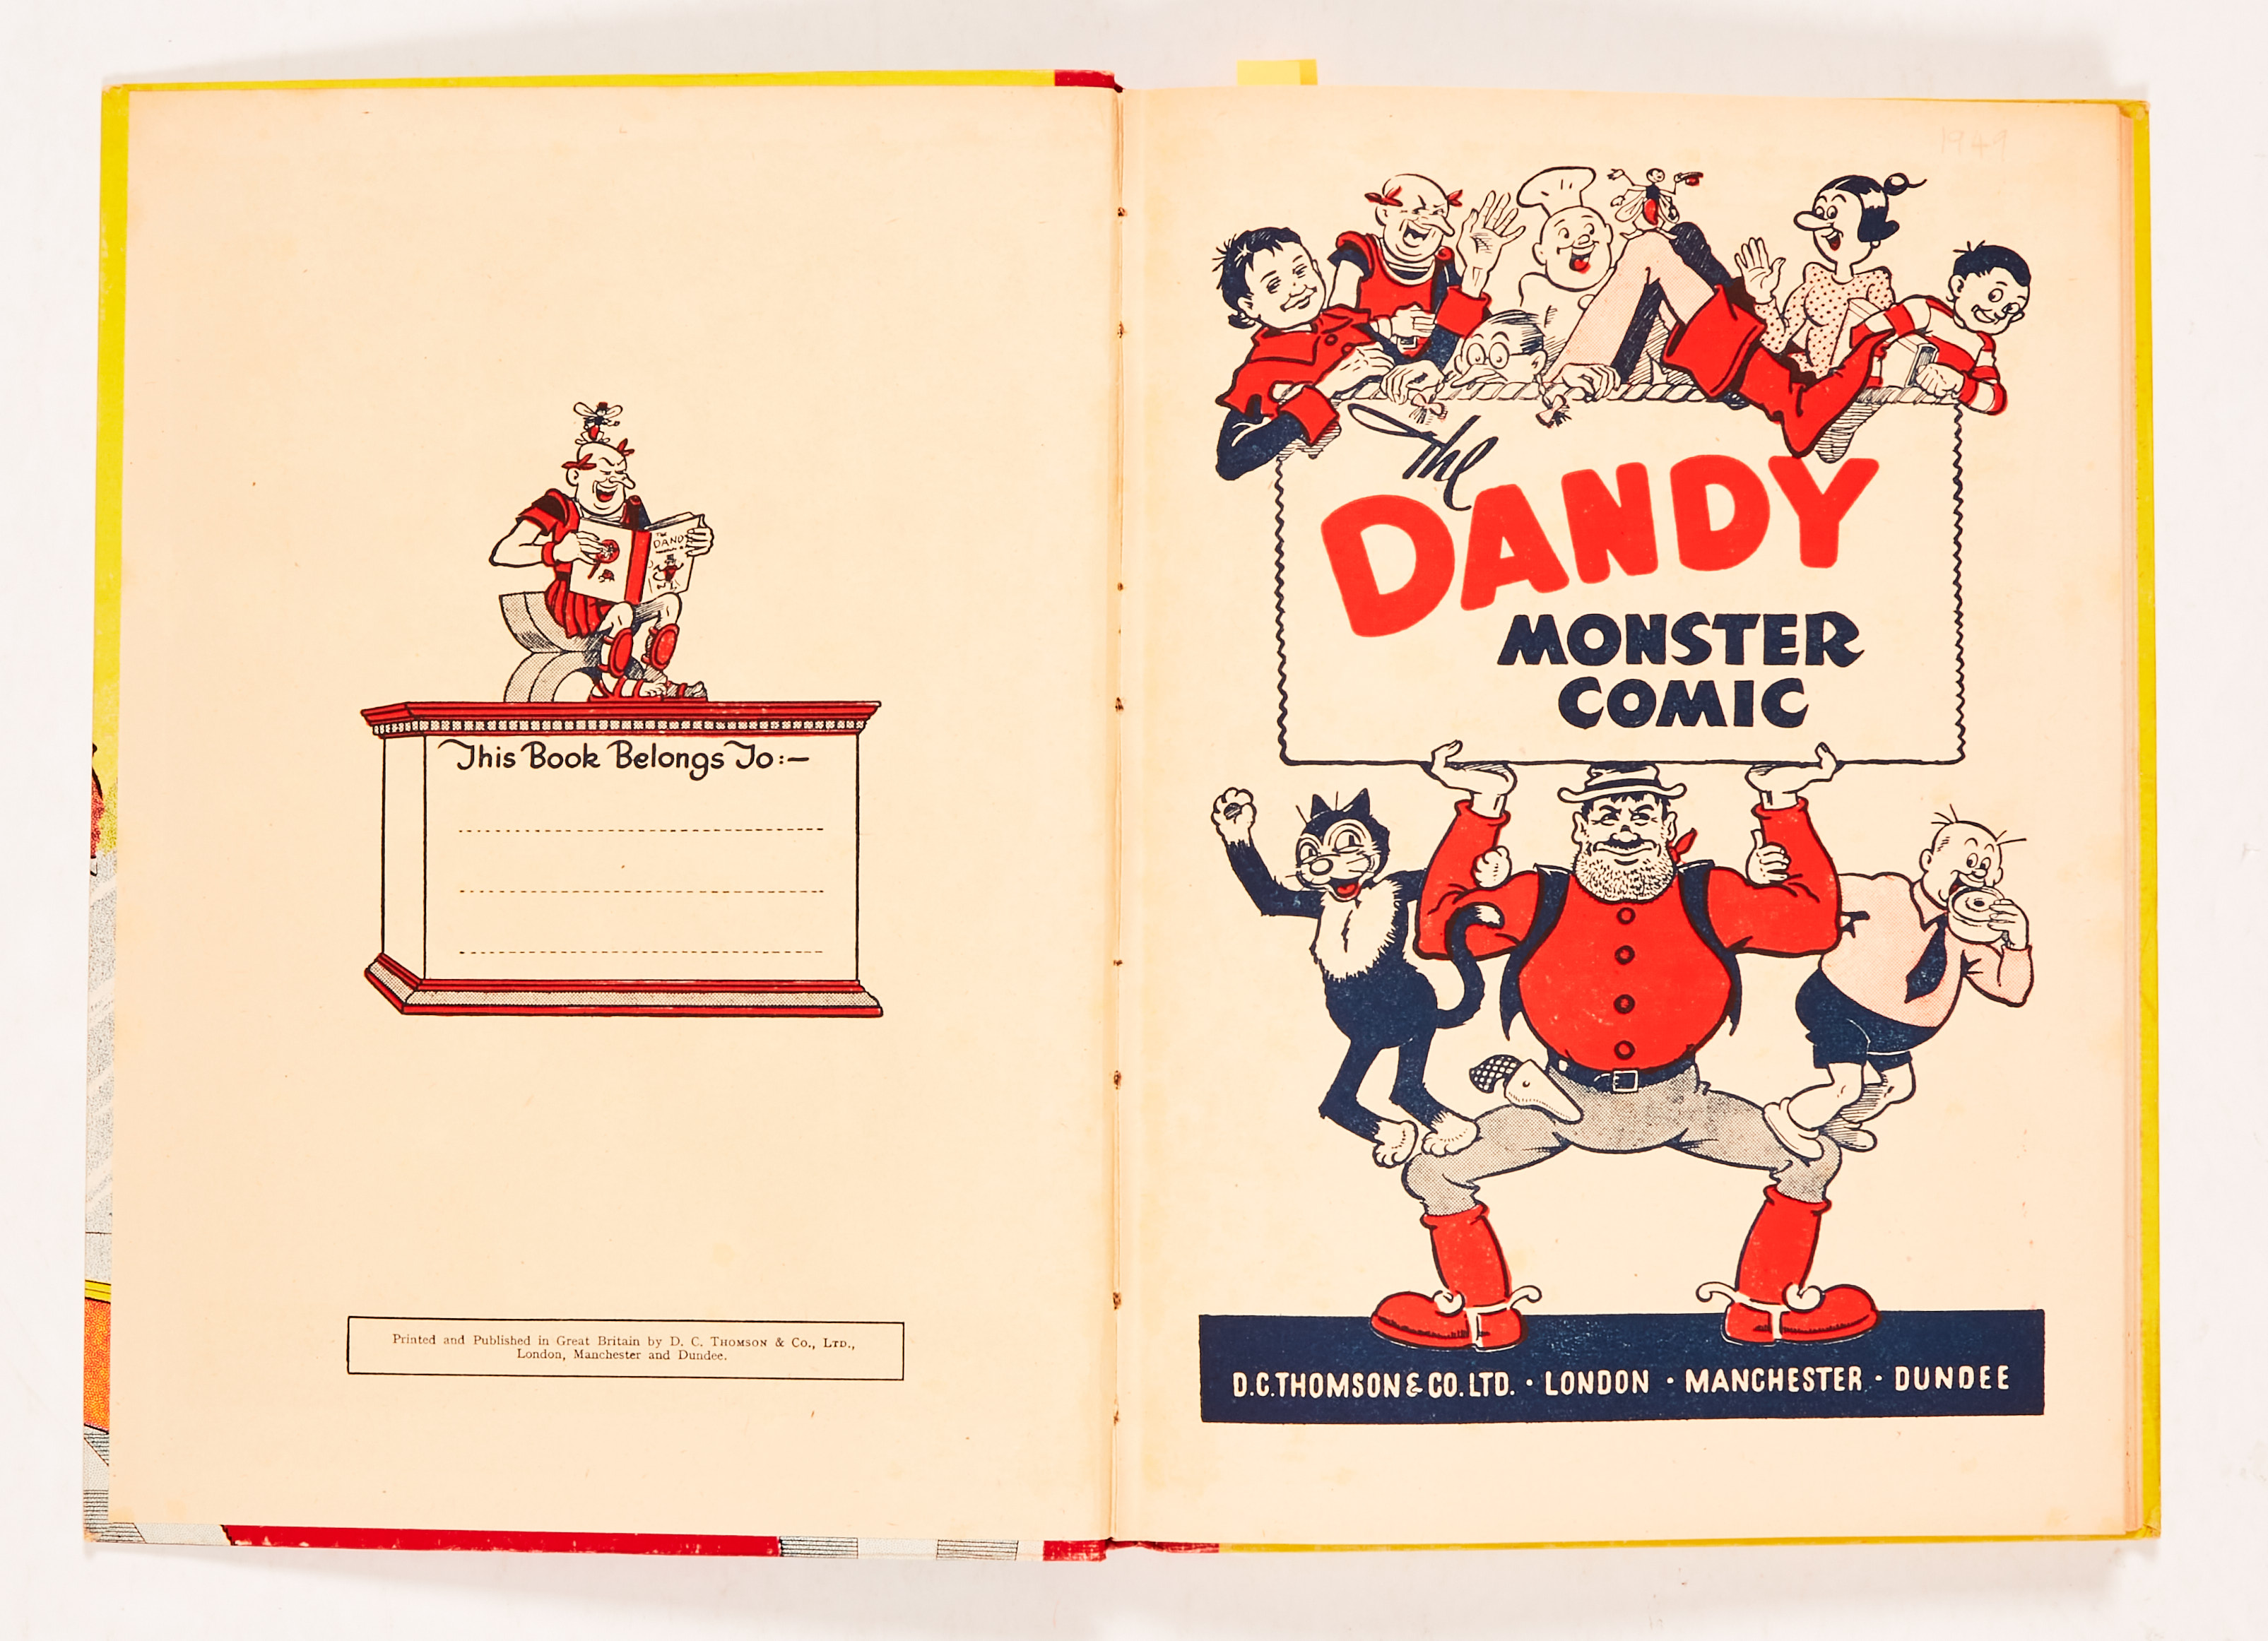 Dandy Monster Comic (1949). Korky the Toff, Dan the Bag Man! From the Brenda Butler Archive. - Image 2 of 4